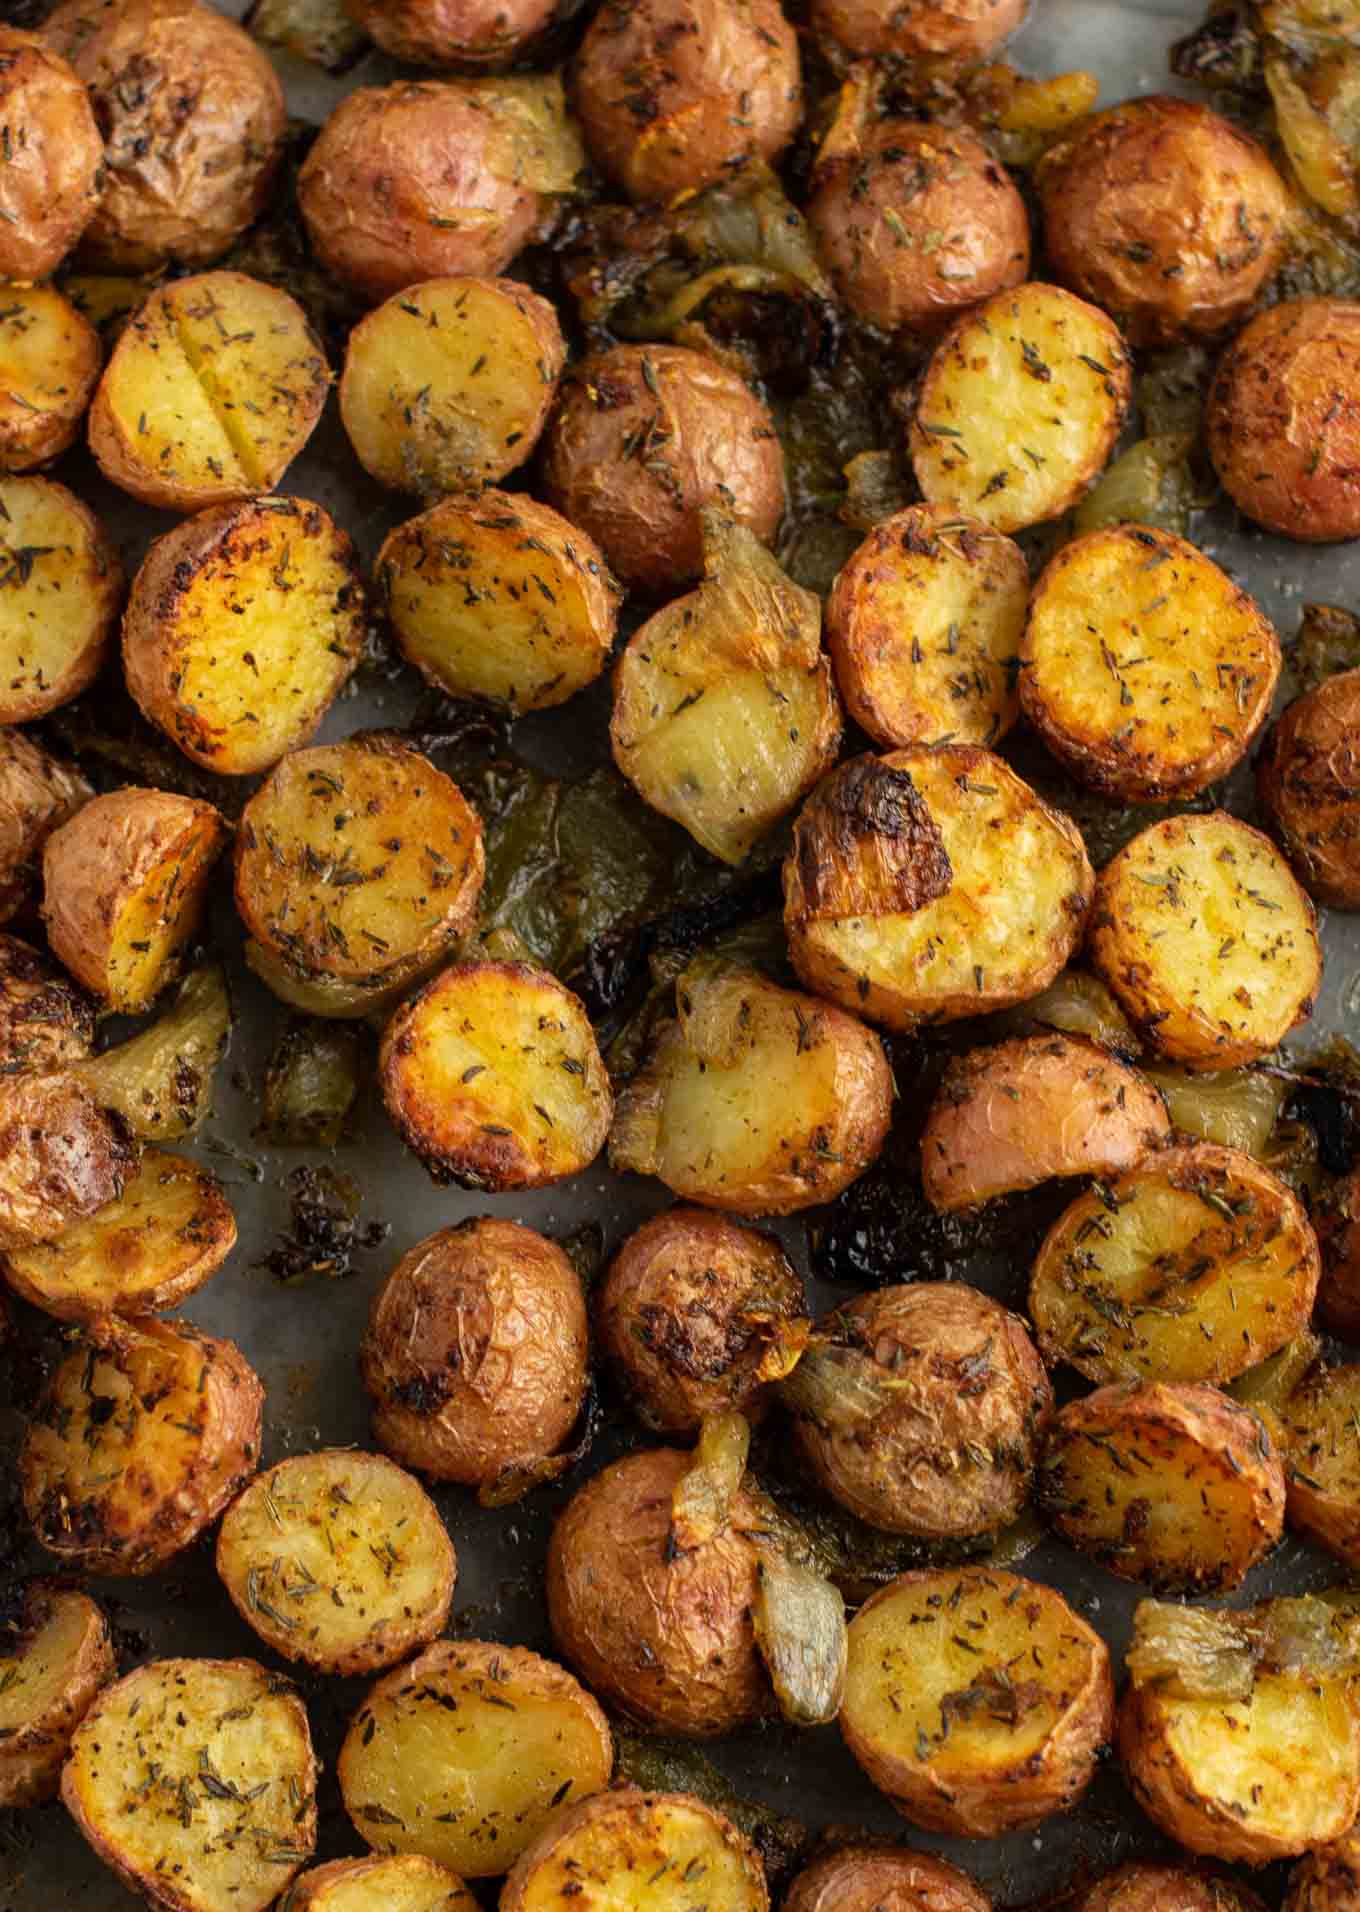 Easy roasted potatoes and onions – delicious side dish! #potatoesandonions #sidedish #potatoes #dinner 